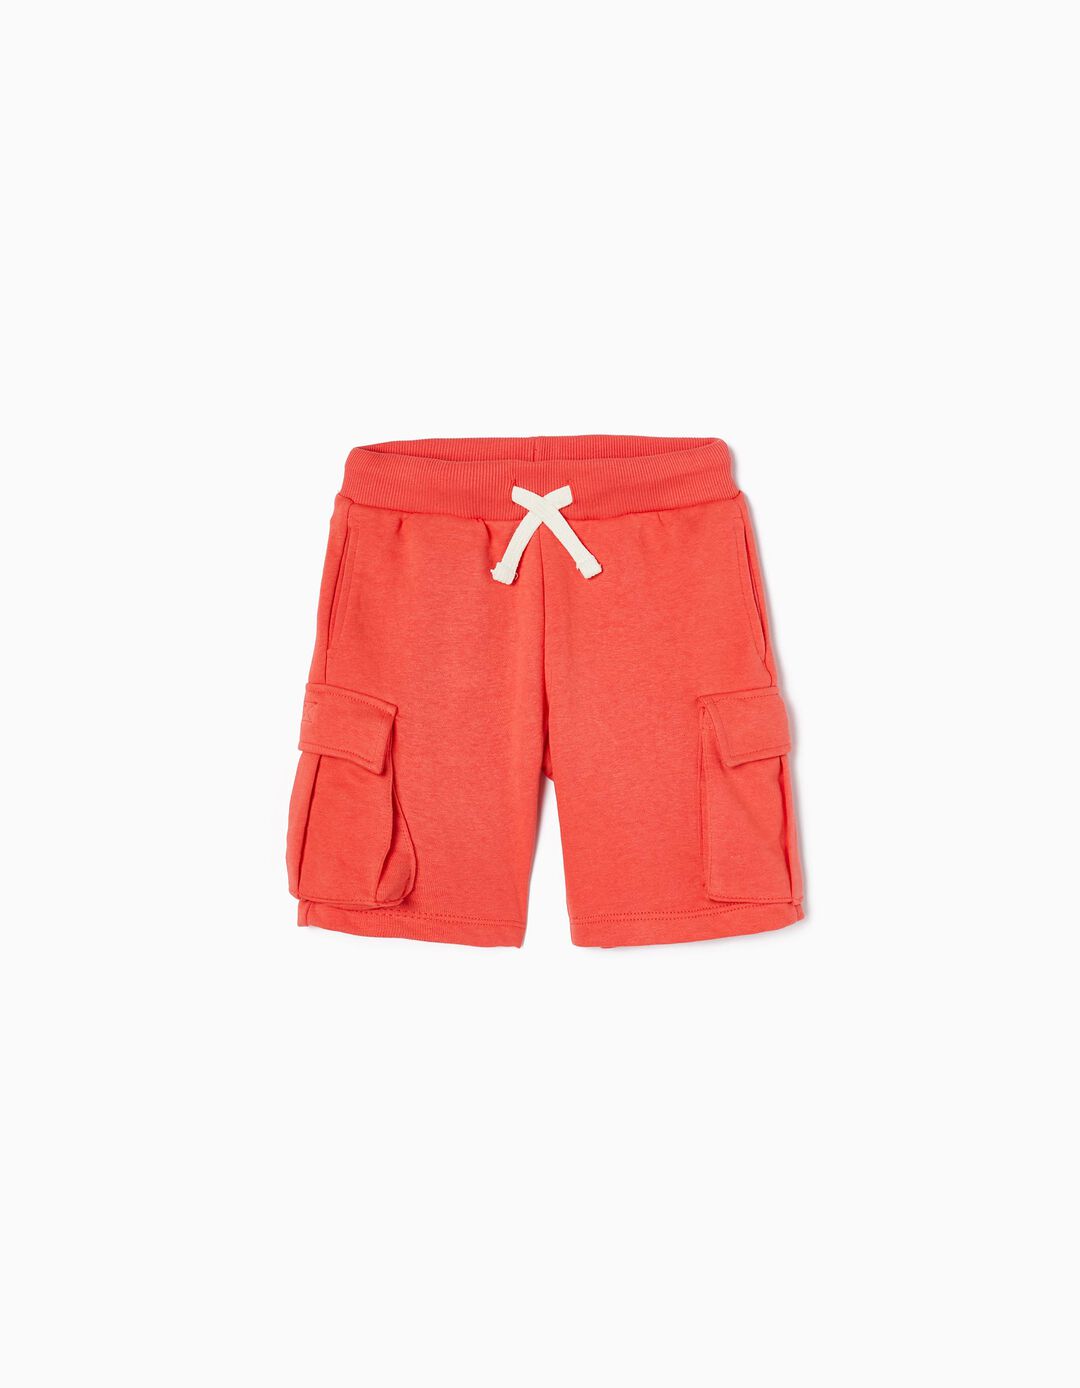 Sports Shorts with Cargo Pockets for Boys, Coral